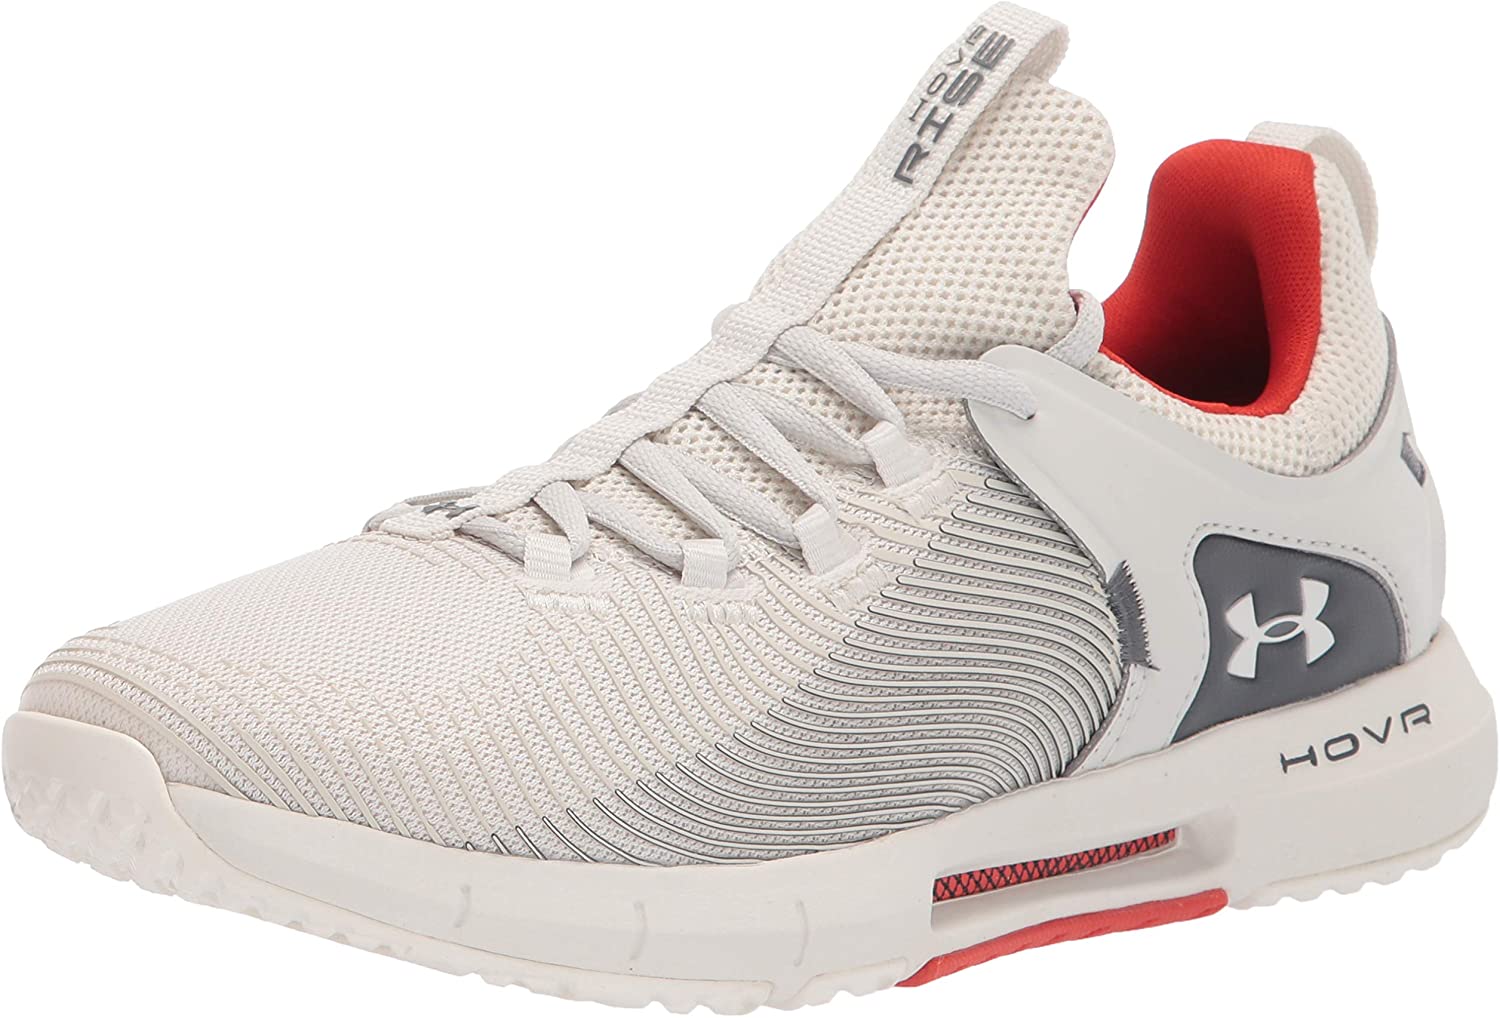 Under Armour Mens HOVR Rise 2 Cross Trainer